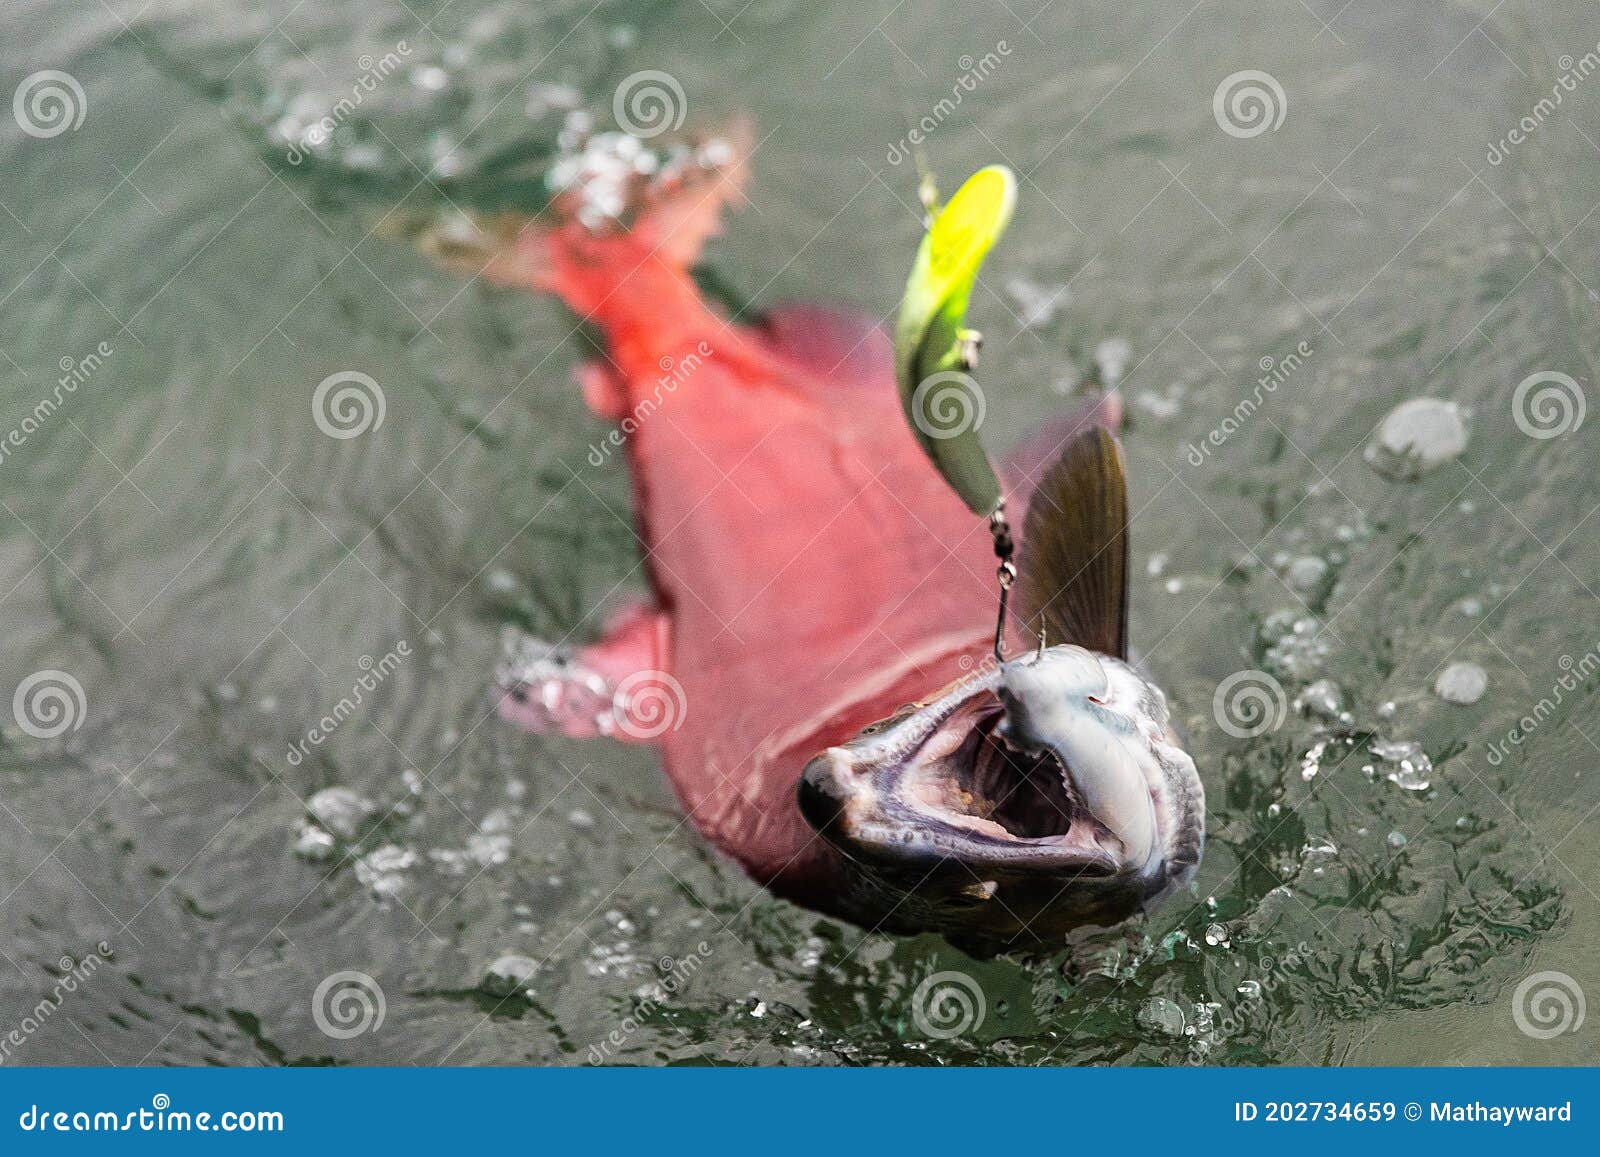 Sockeye Salmon Hooked on a Fishing Lure in River Stock Image